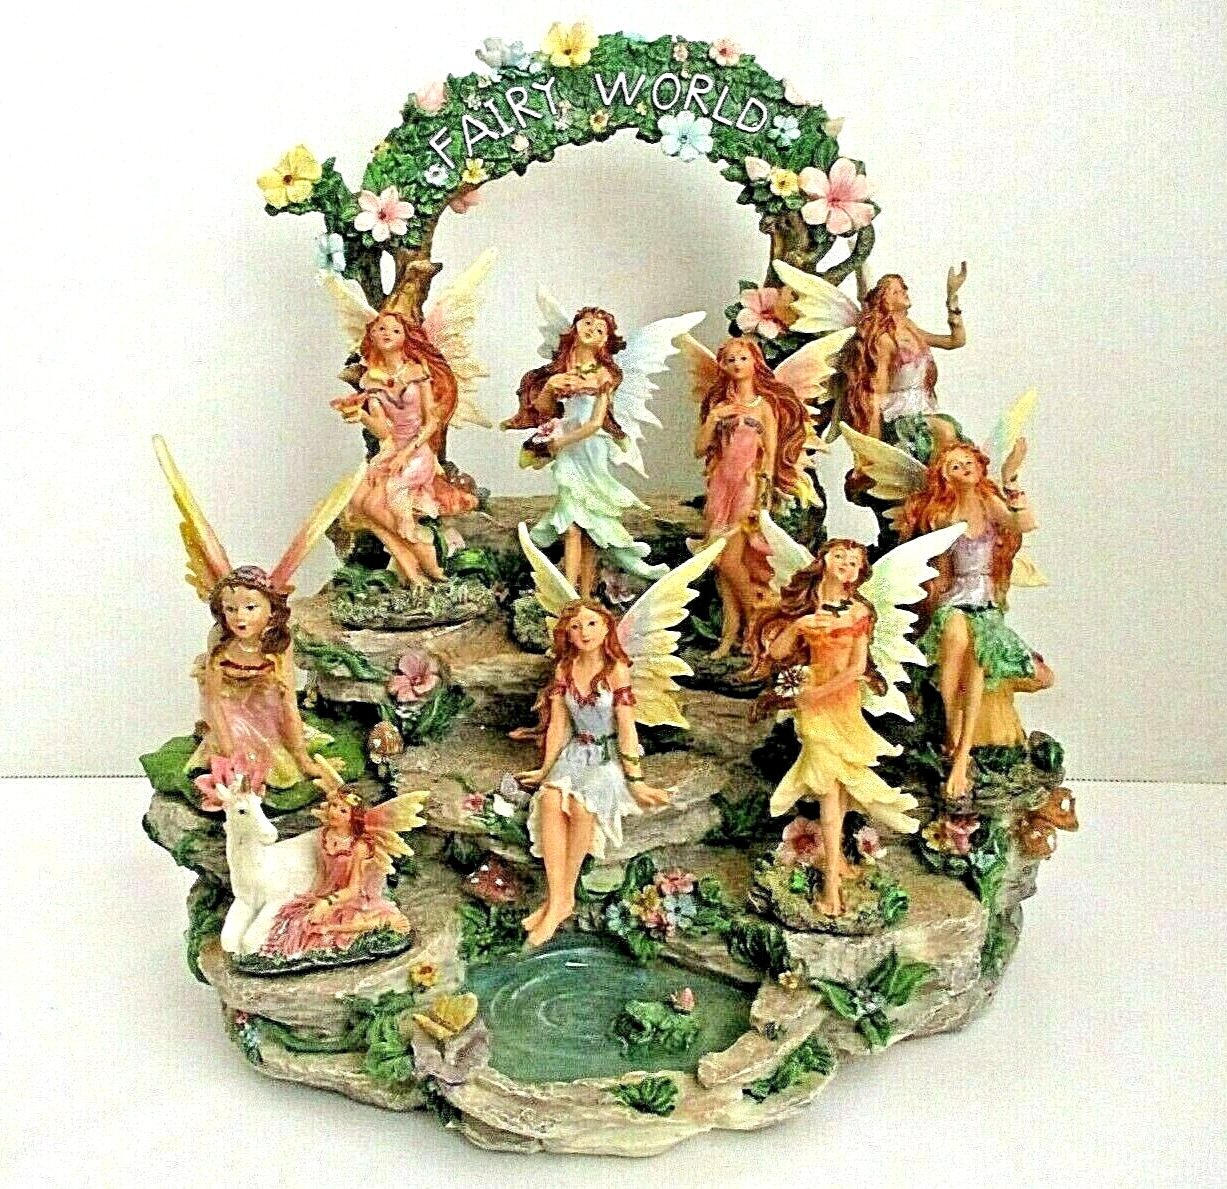 Fairy World Figurines with Large Display Ornate Resin Collectibles, 9 Figures